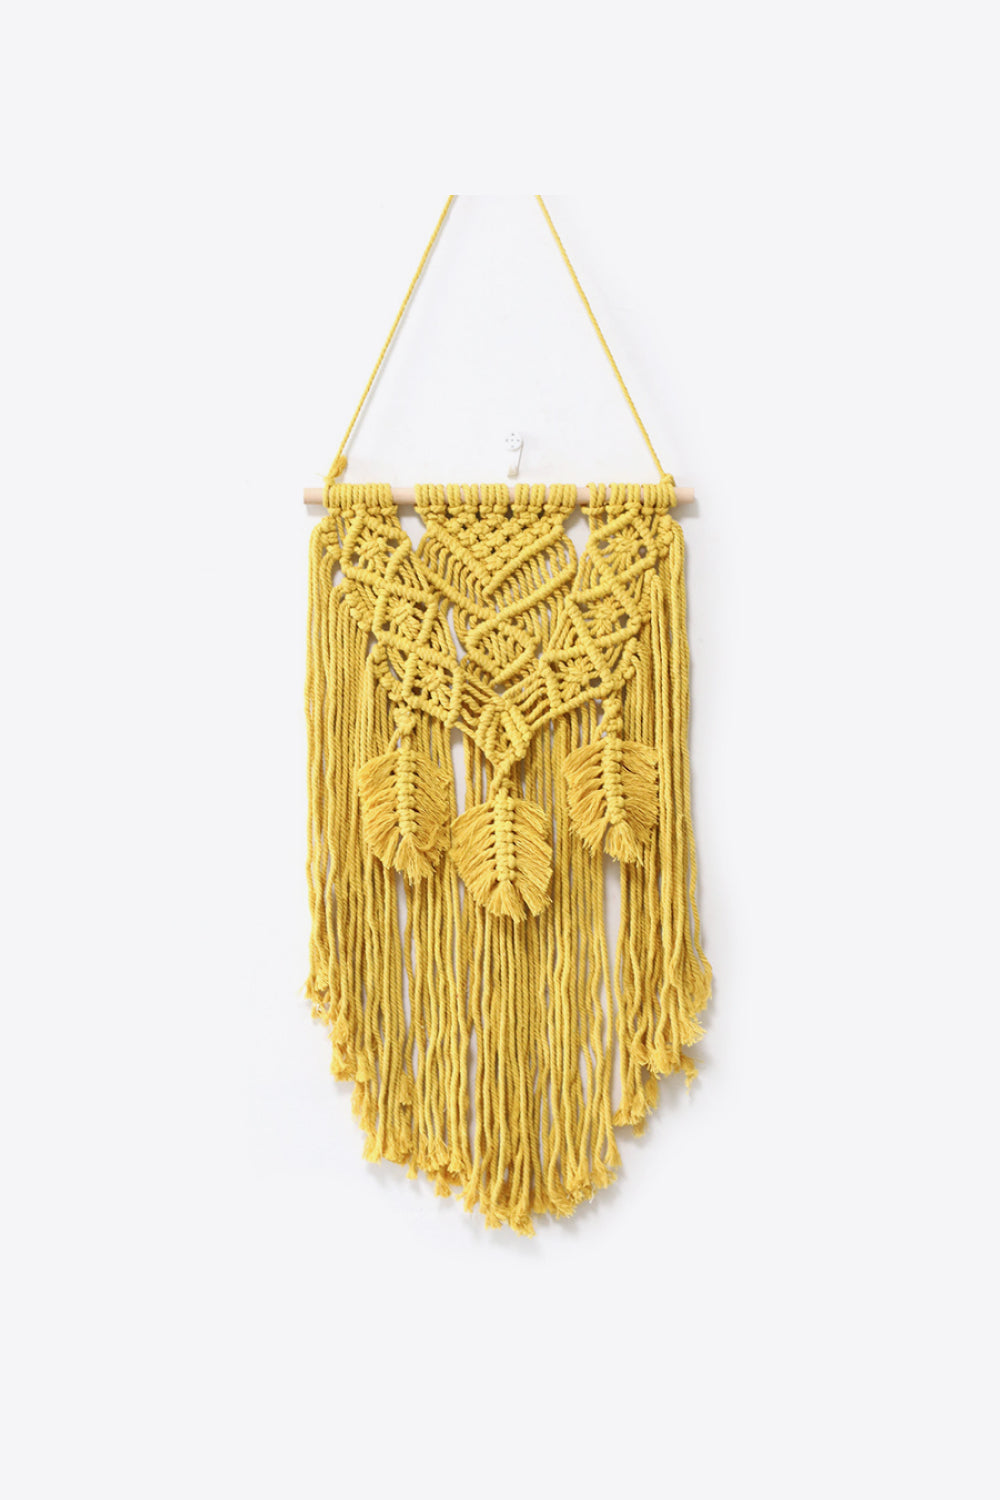 Fully Handmade Fringe Macrame Wall Hanging [ Click for more options]